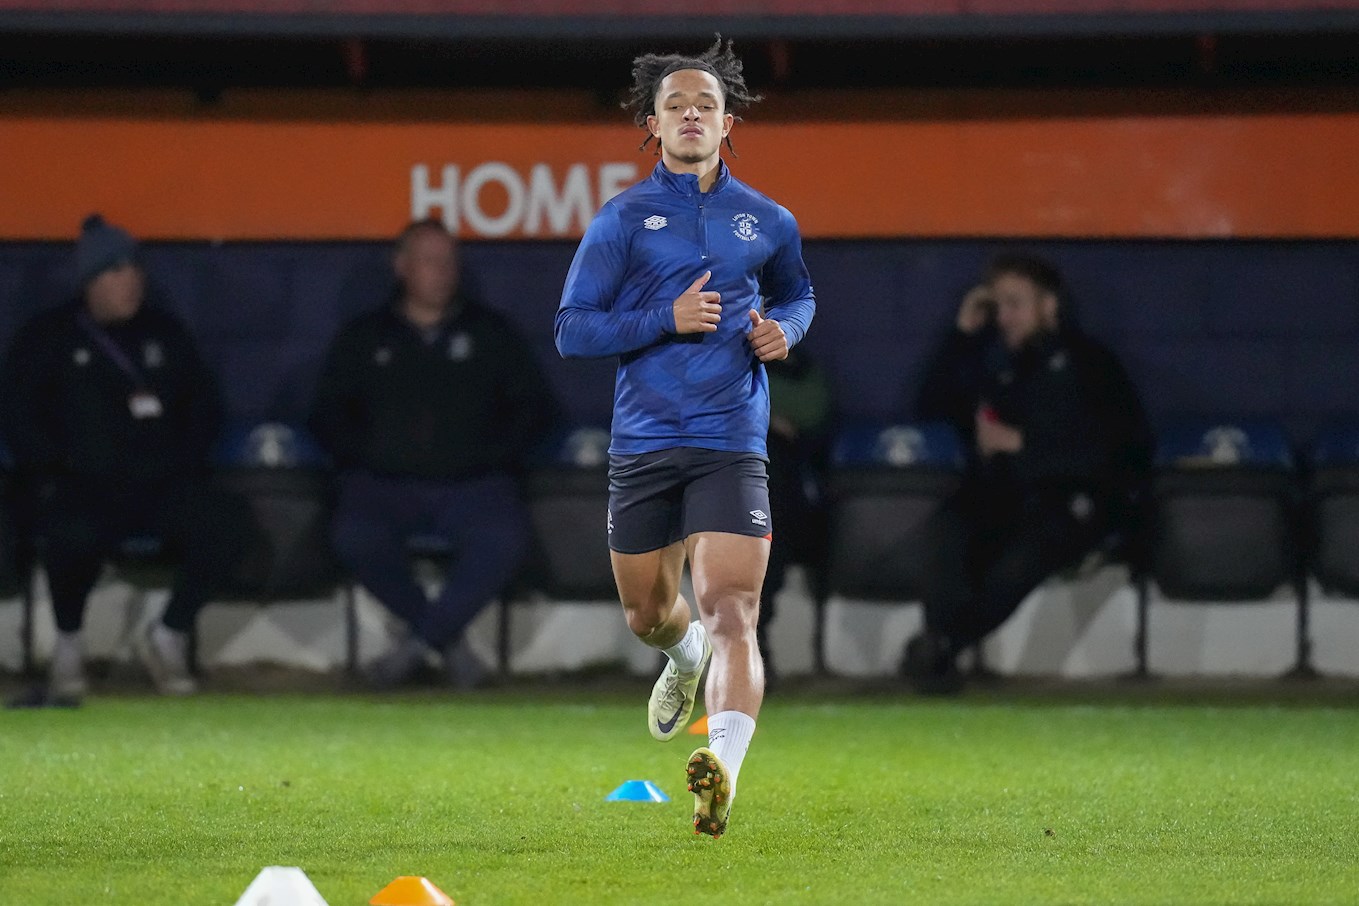 Conor Lawless warming up at Kenilworth Road.